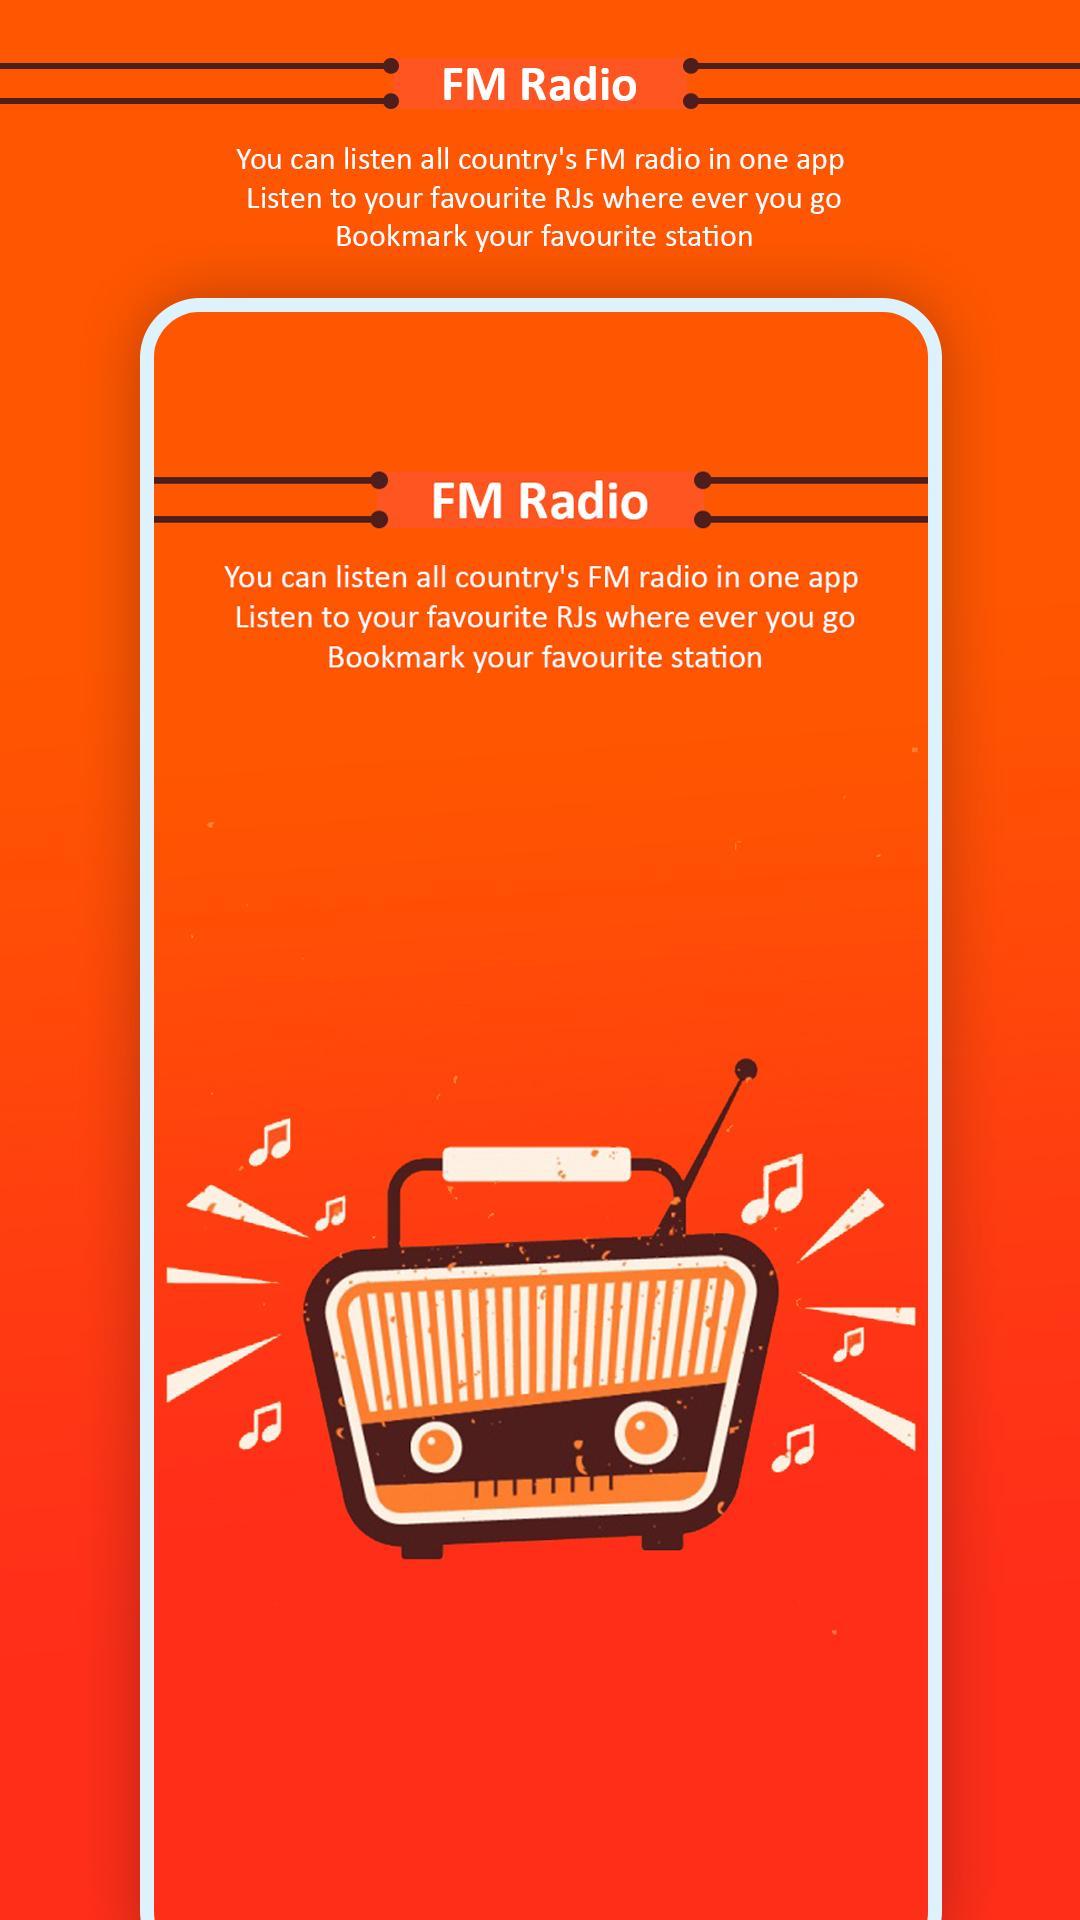 All Country FM Radio - Live Radio for Android - APK Download